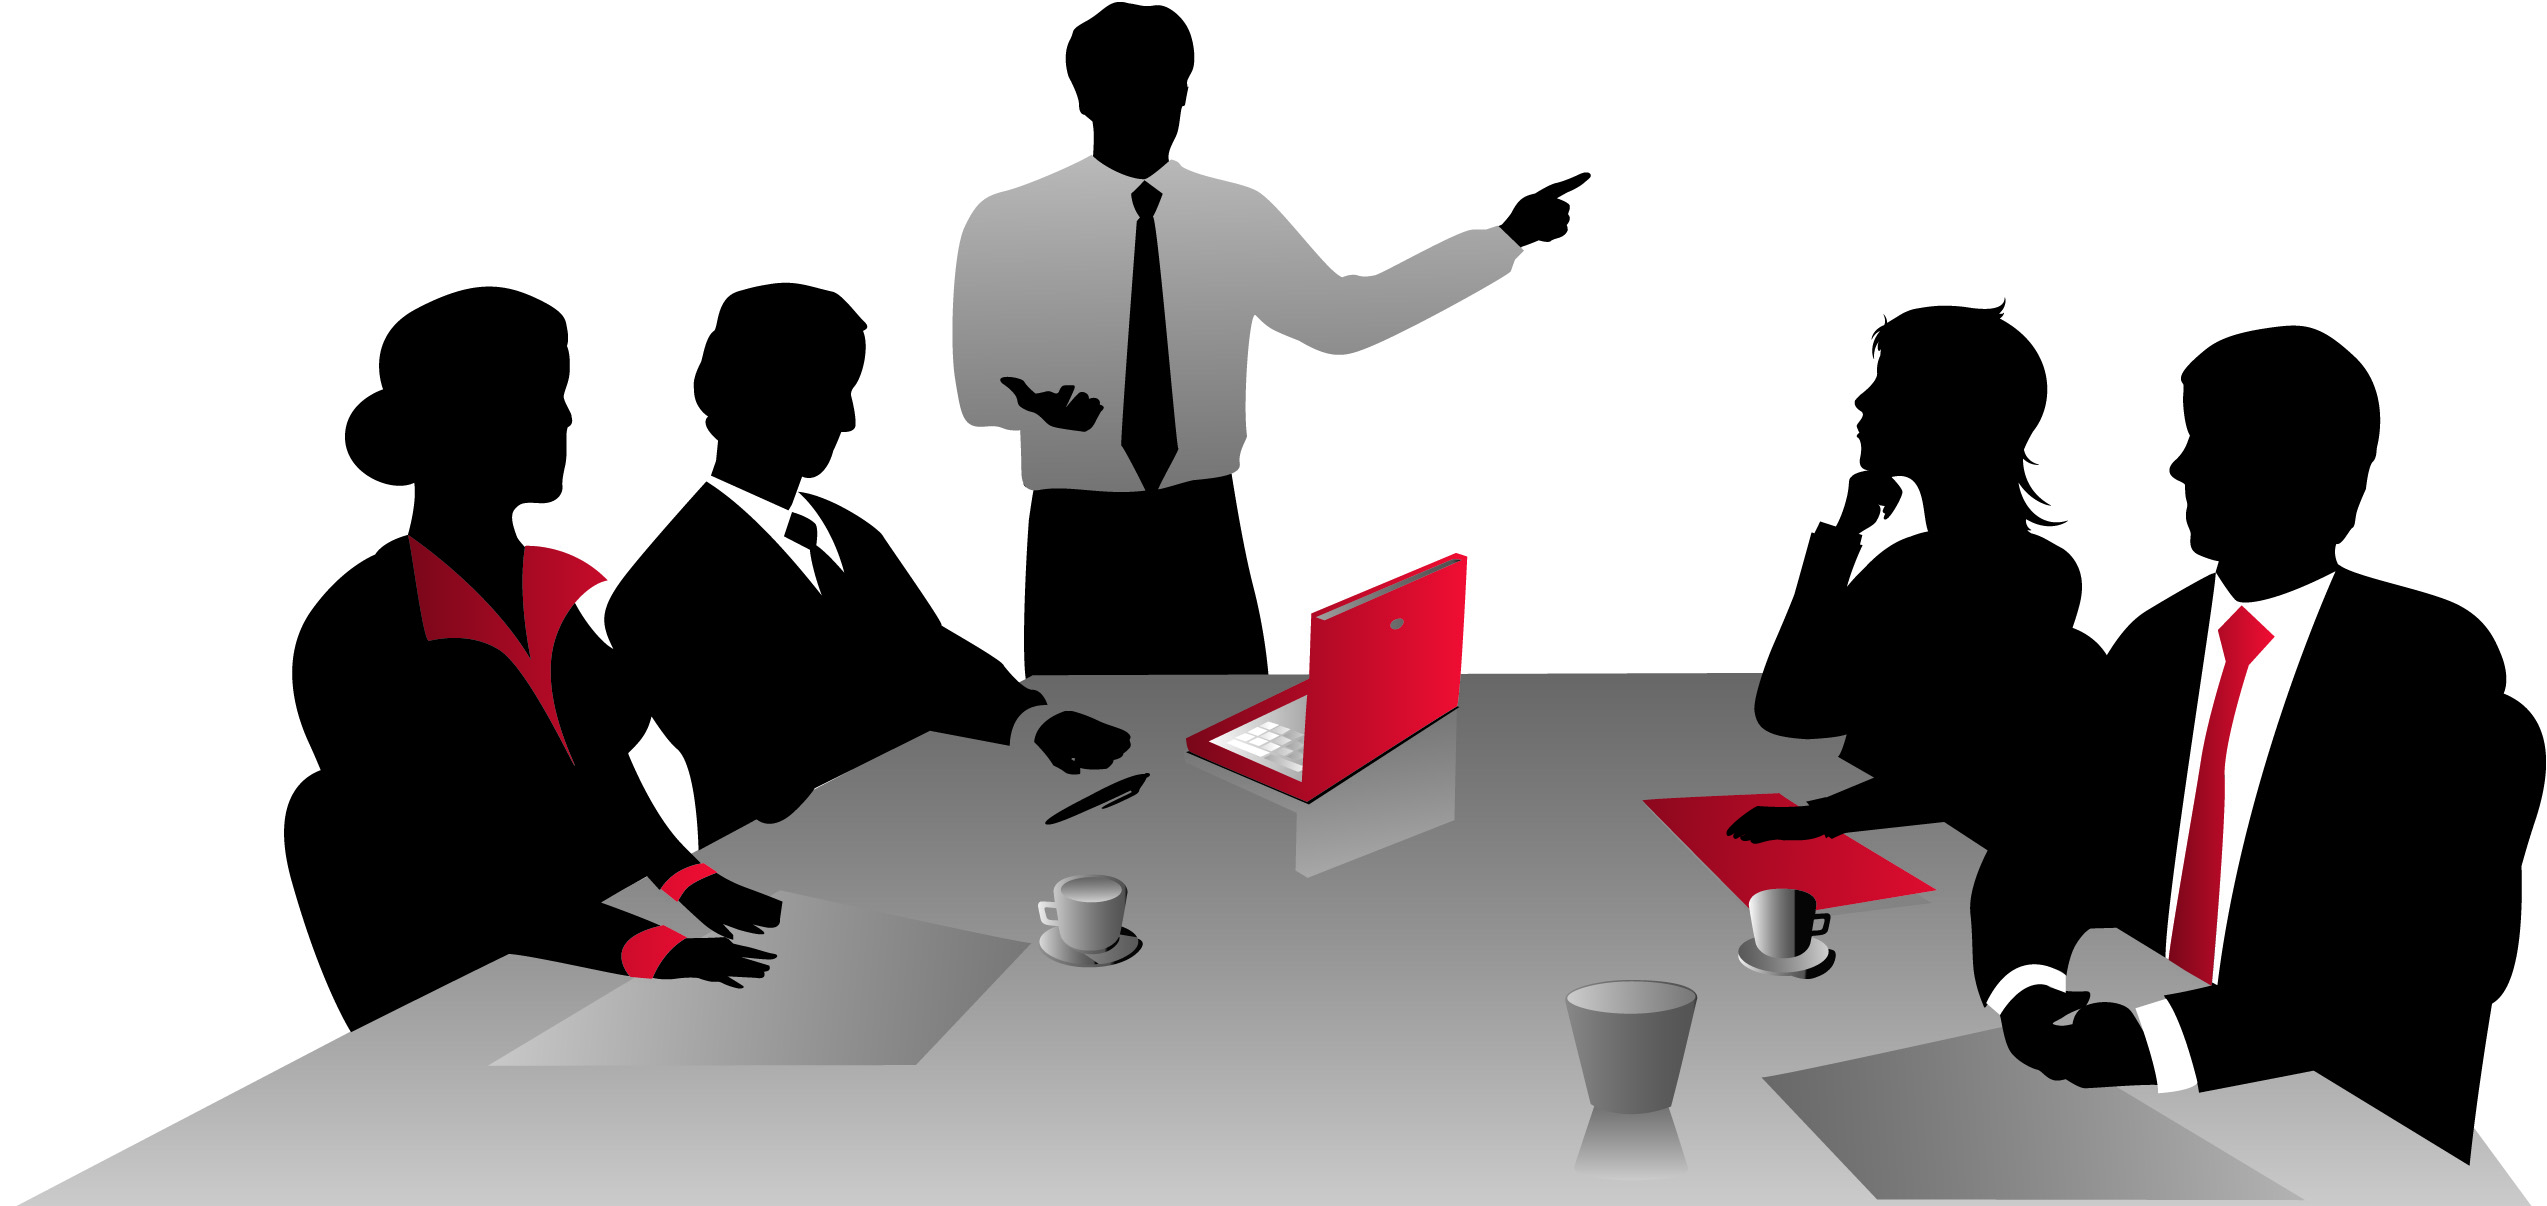 Presentation skills in any negotiation environment is a vital business aspect